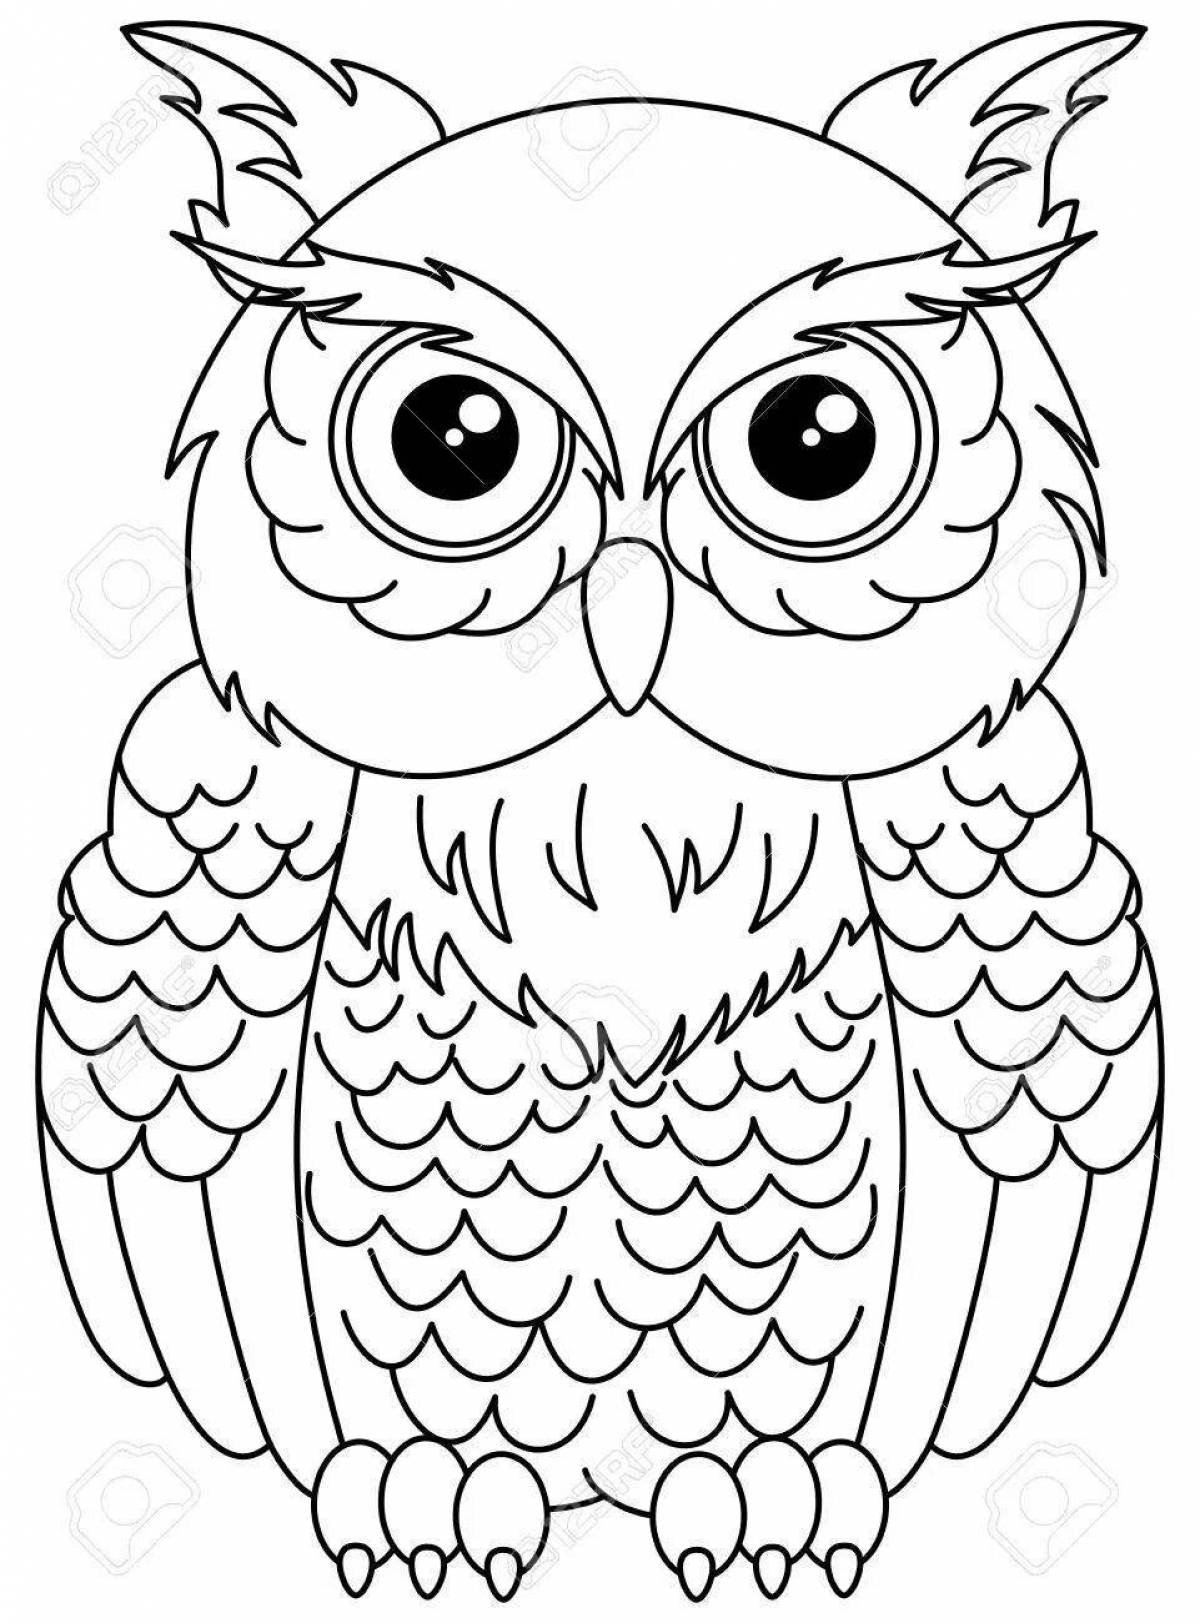 Coloring page elegant long-eared owl